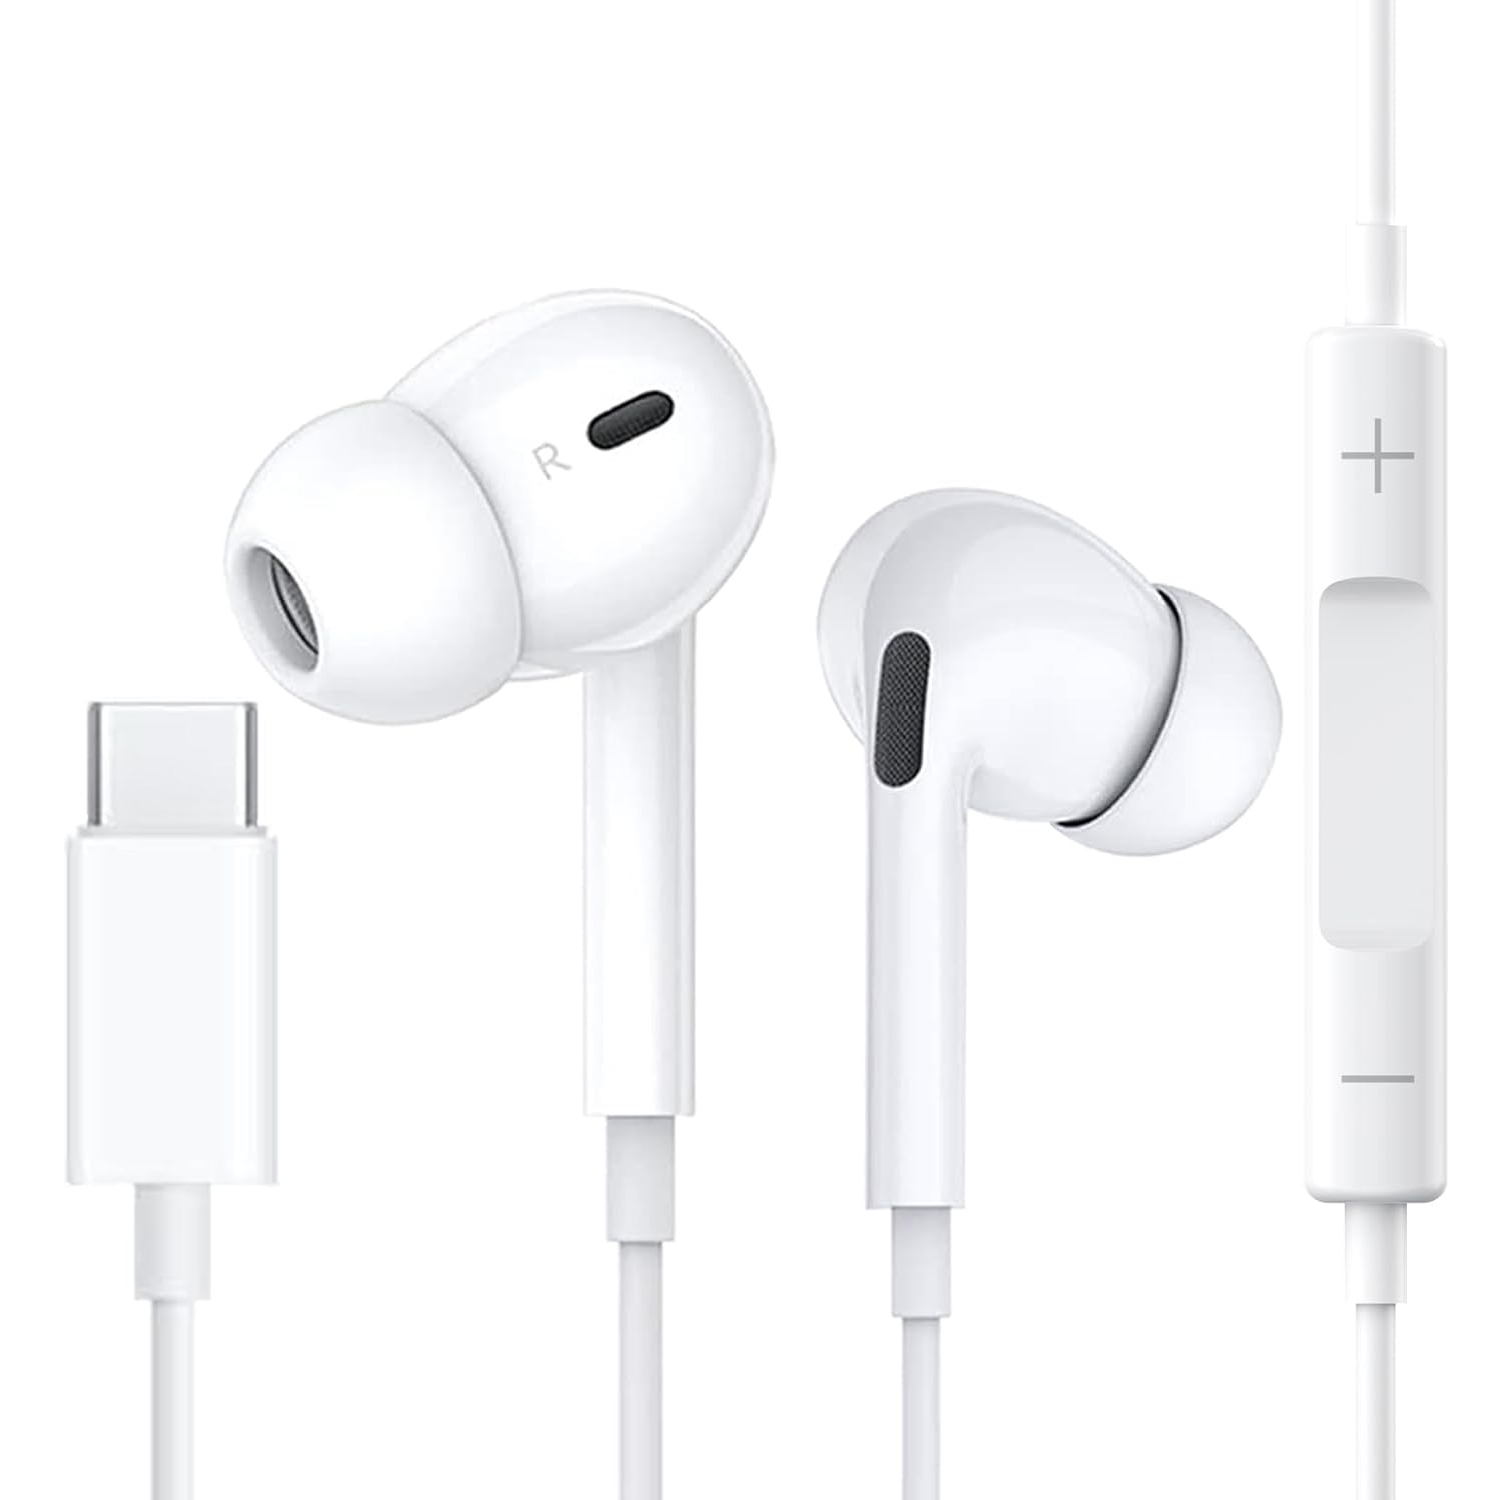 USB C Headphones, Type C Wired Earbuds, in-Ear Headphones with Microphone Noise Canceling Stereo, Earphones Compatible with iPhone 15/Samsung S23/Android/iPad Pro and Most USB C Devices - image 1 of 10